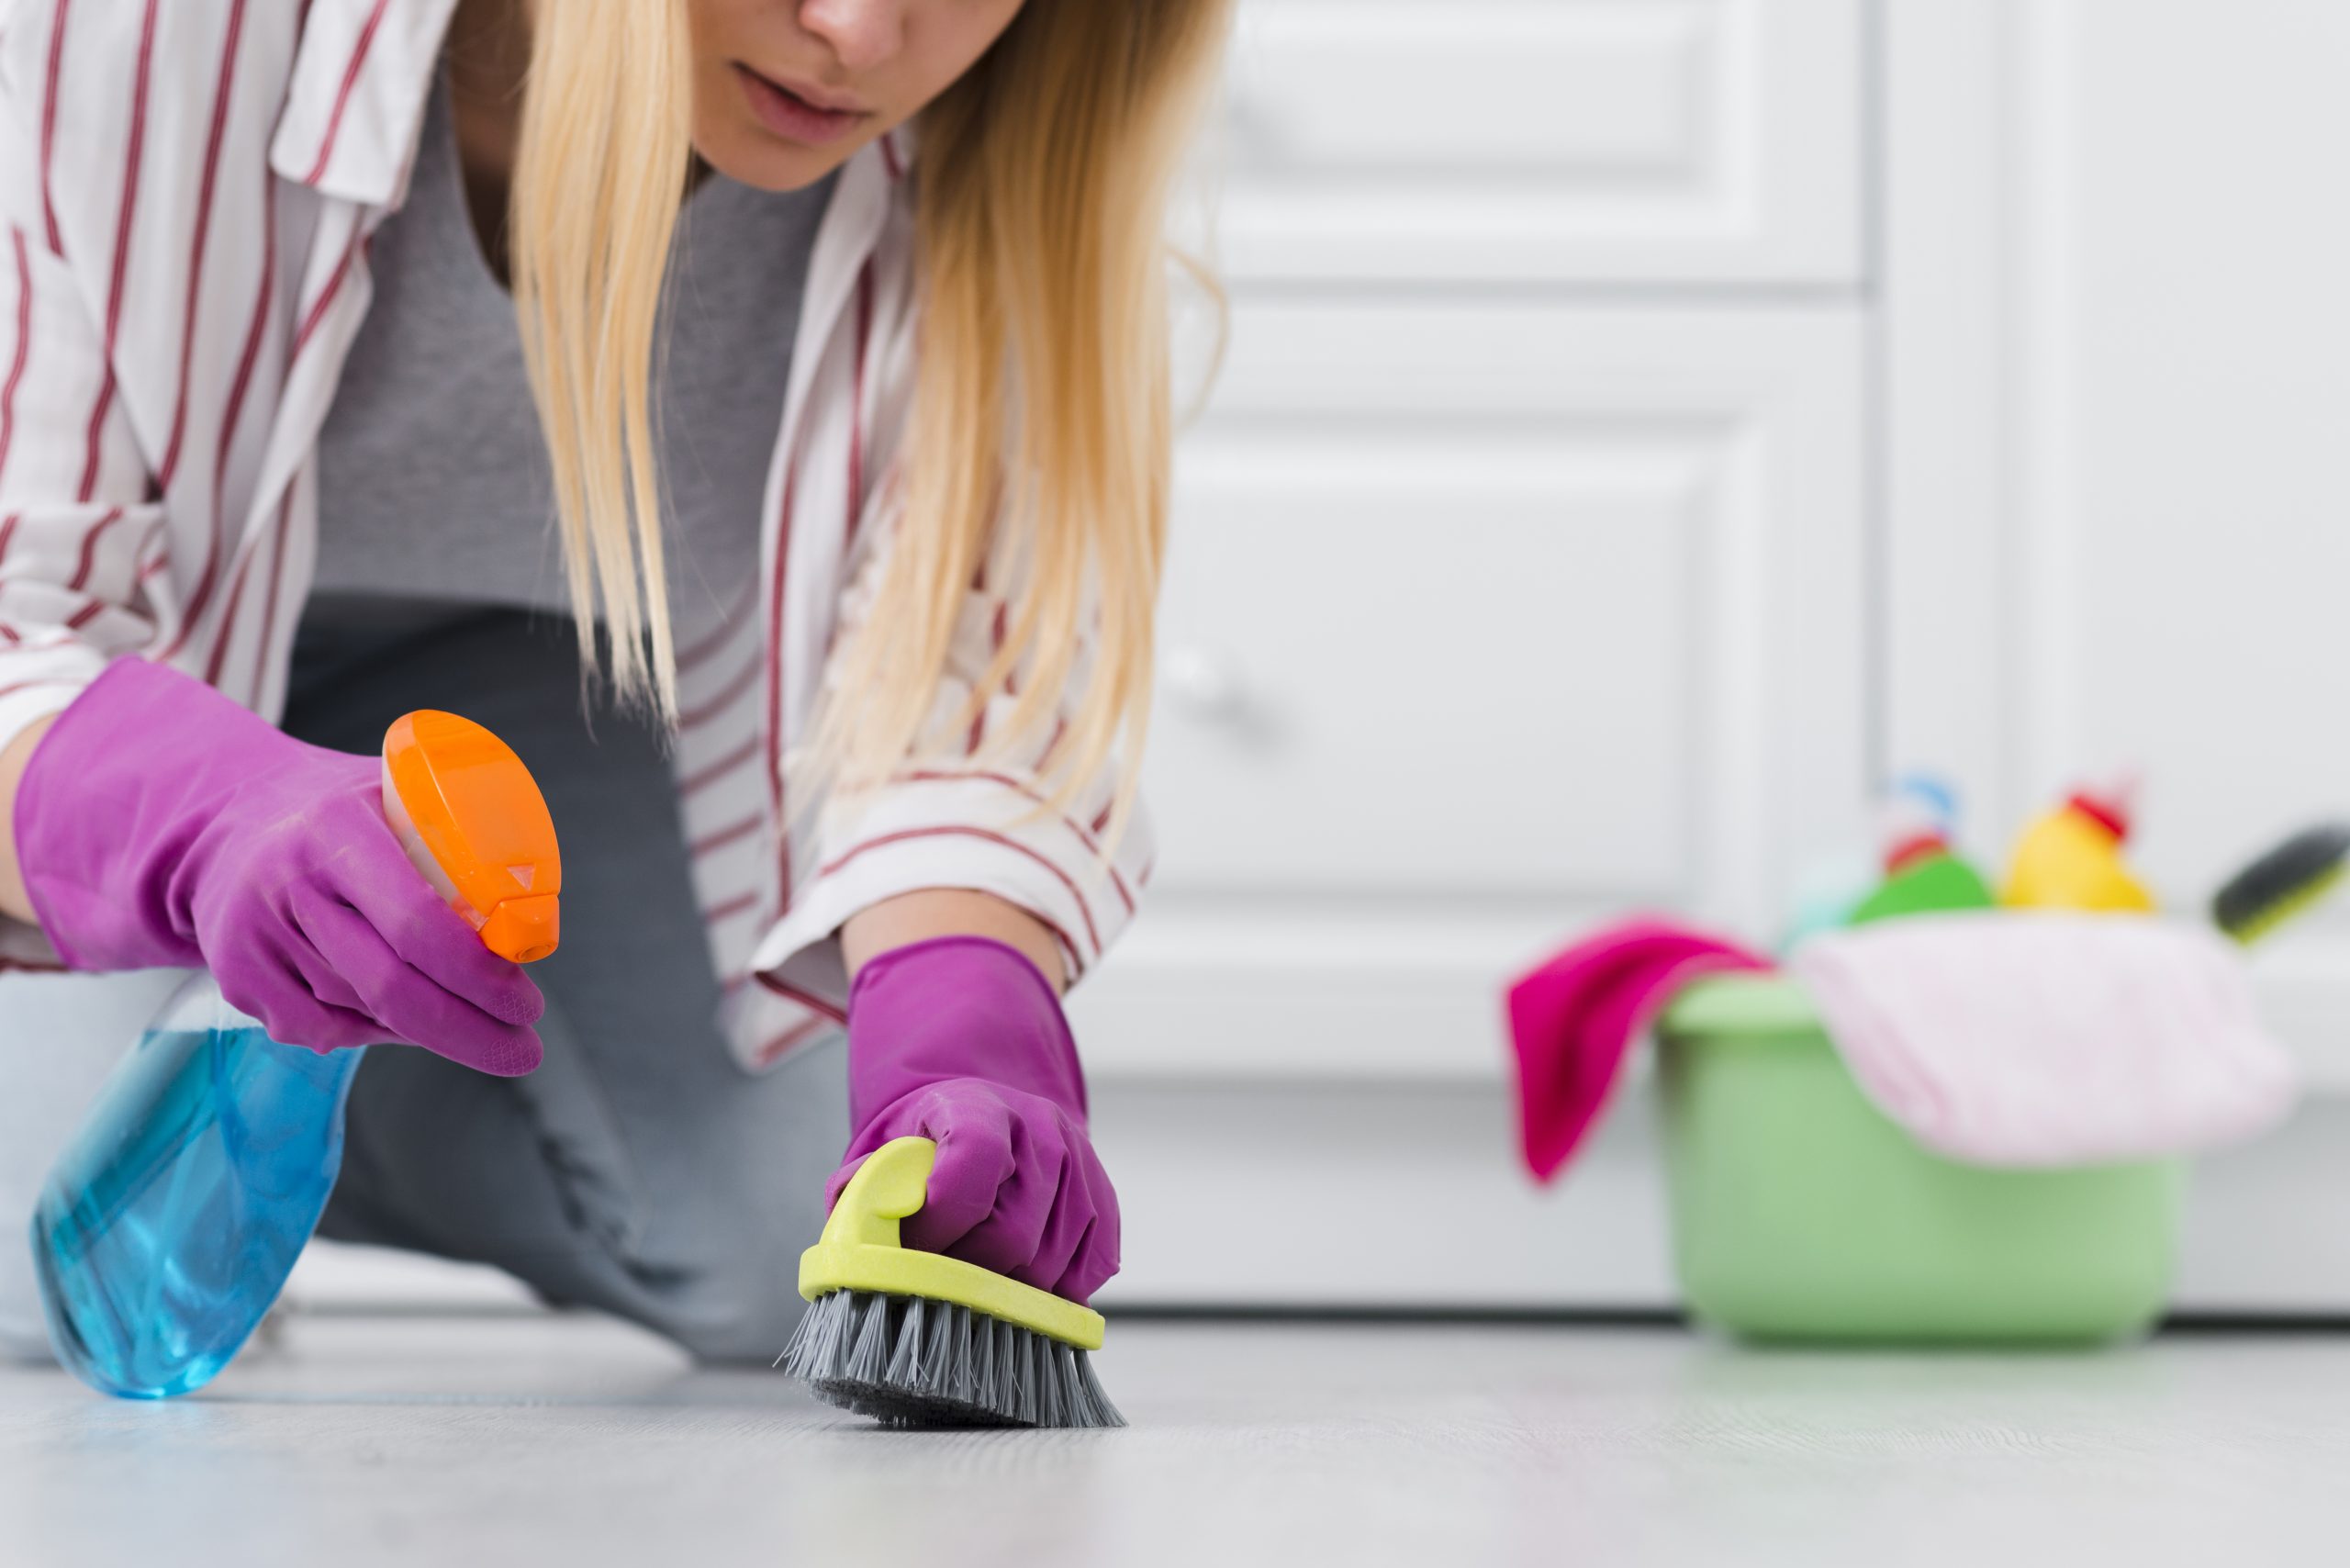 Tampa house cleaning services near me